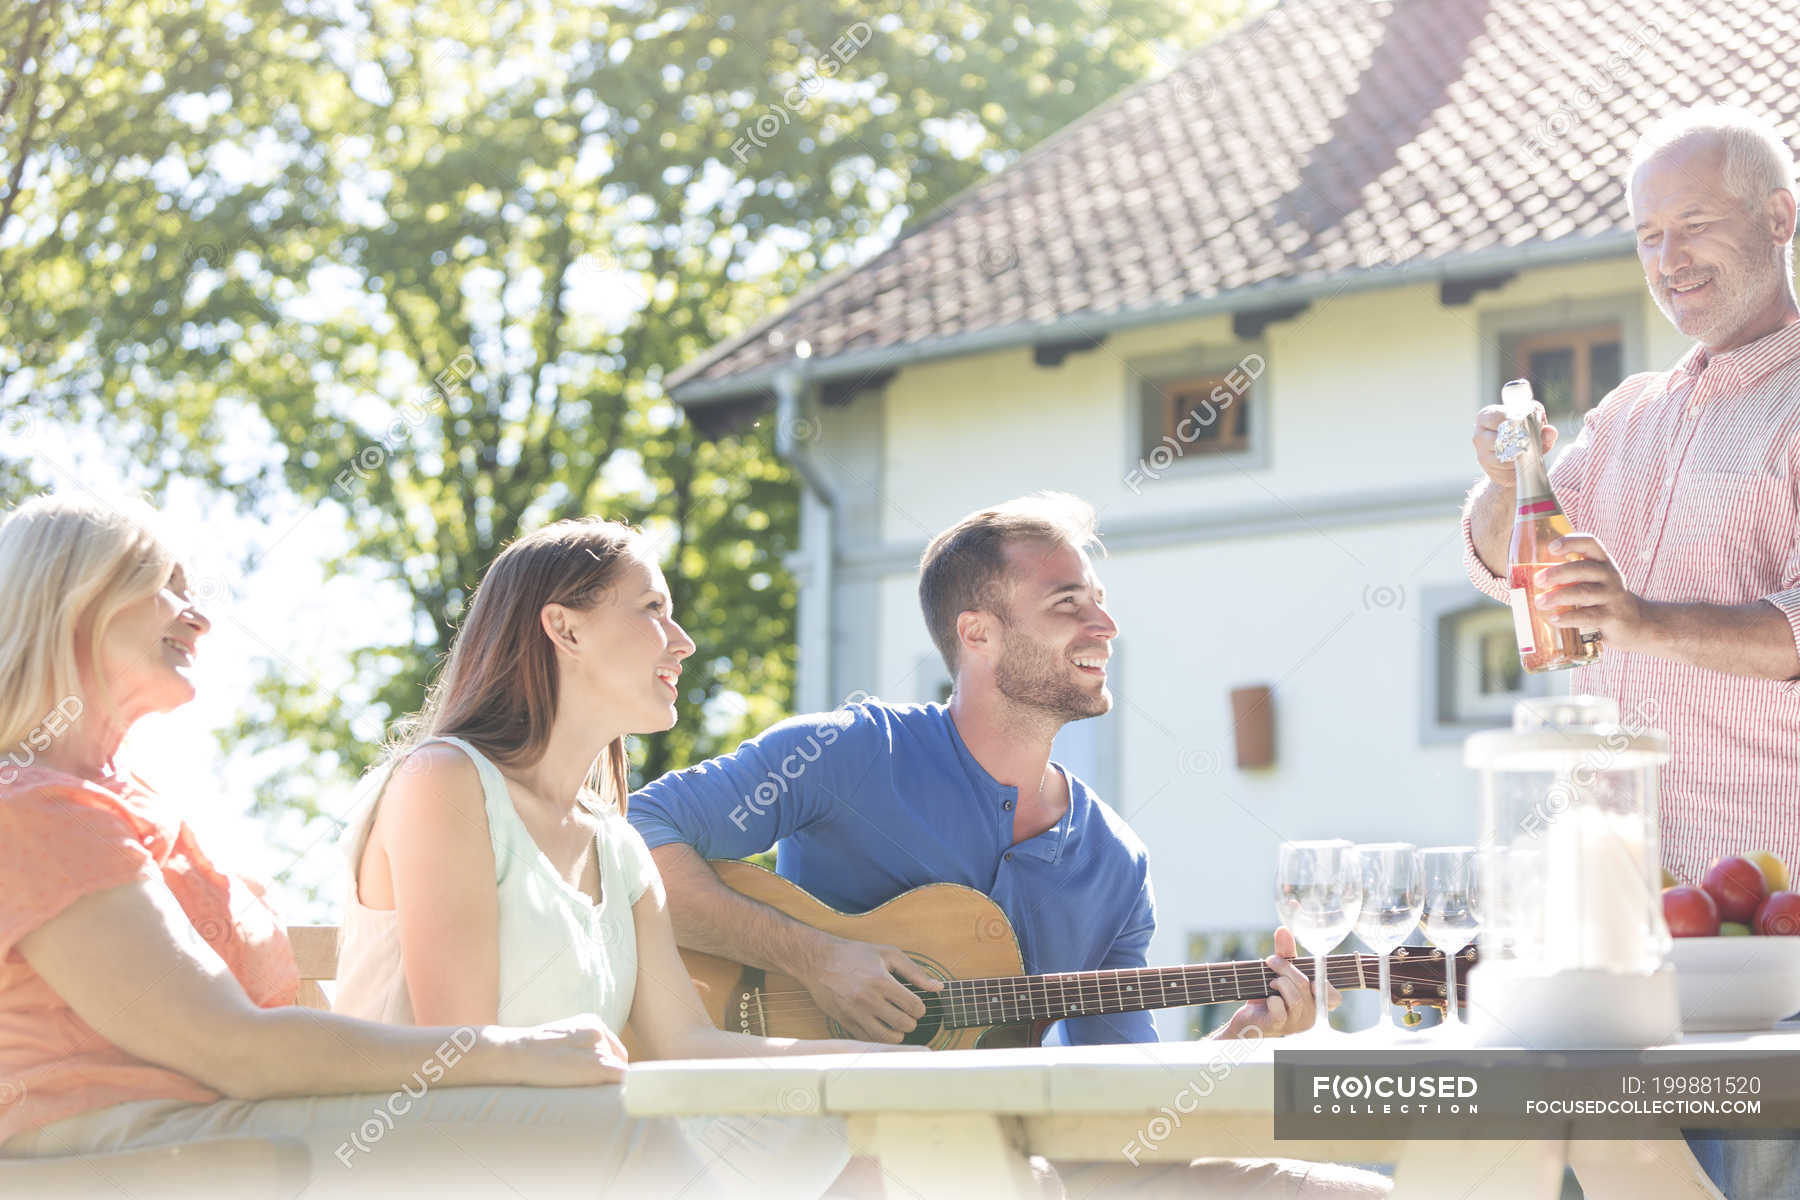 Father Opening Bottle Of Rose Wine For Family At Sunny Patio Table